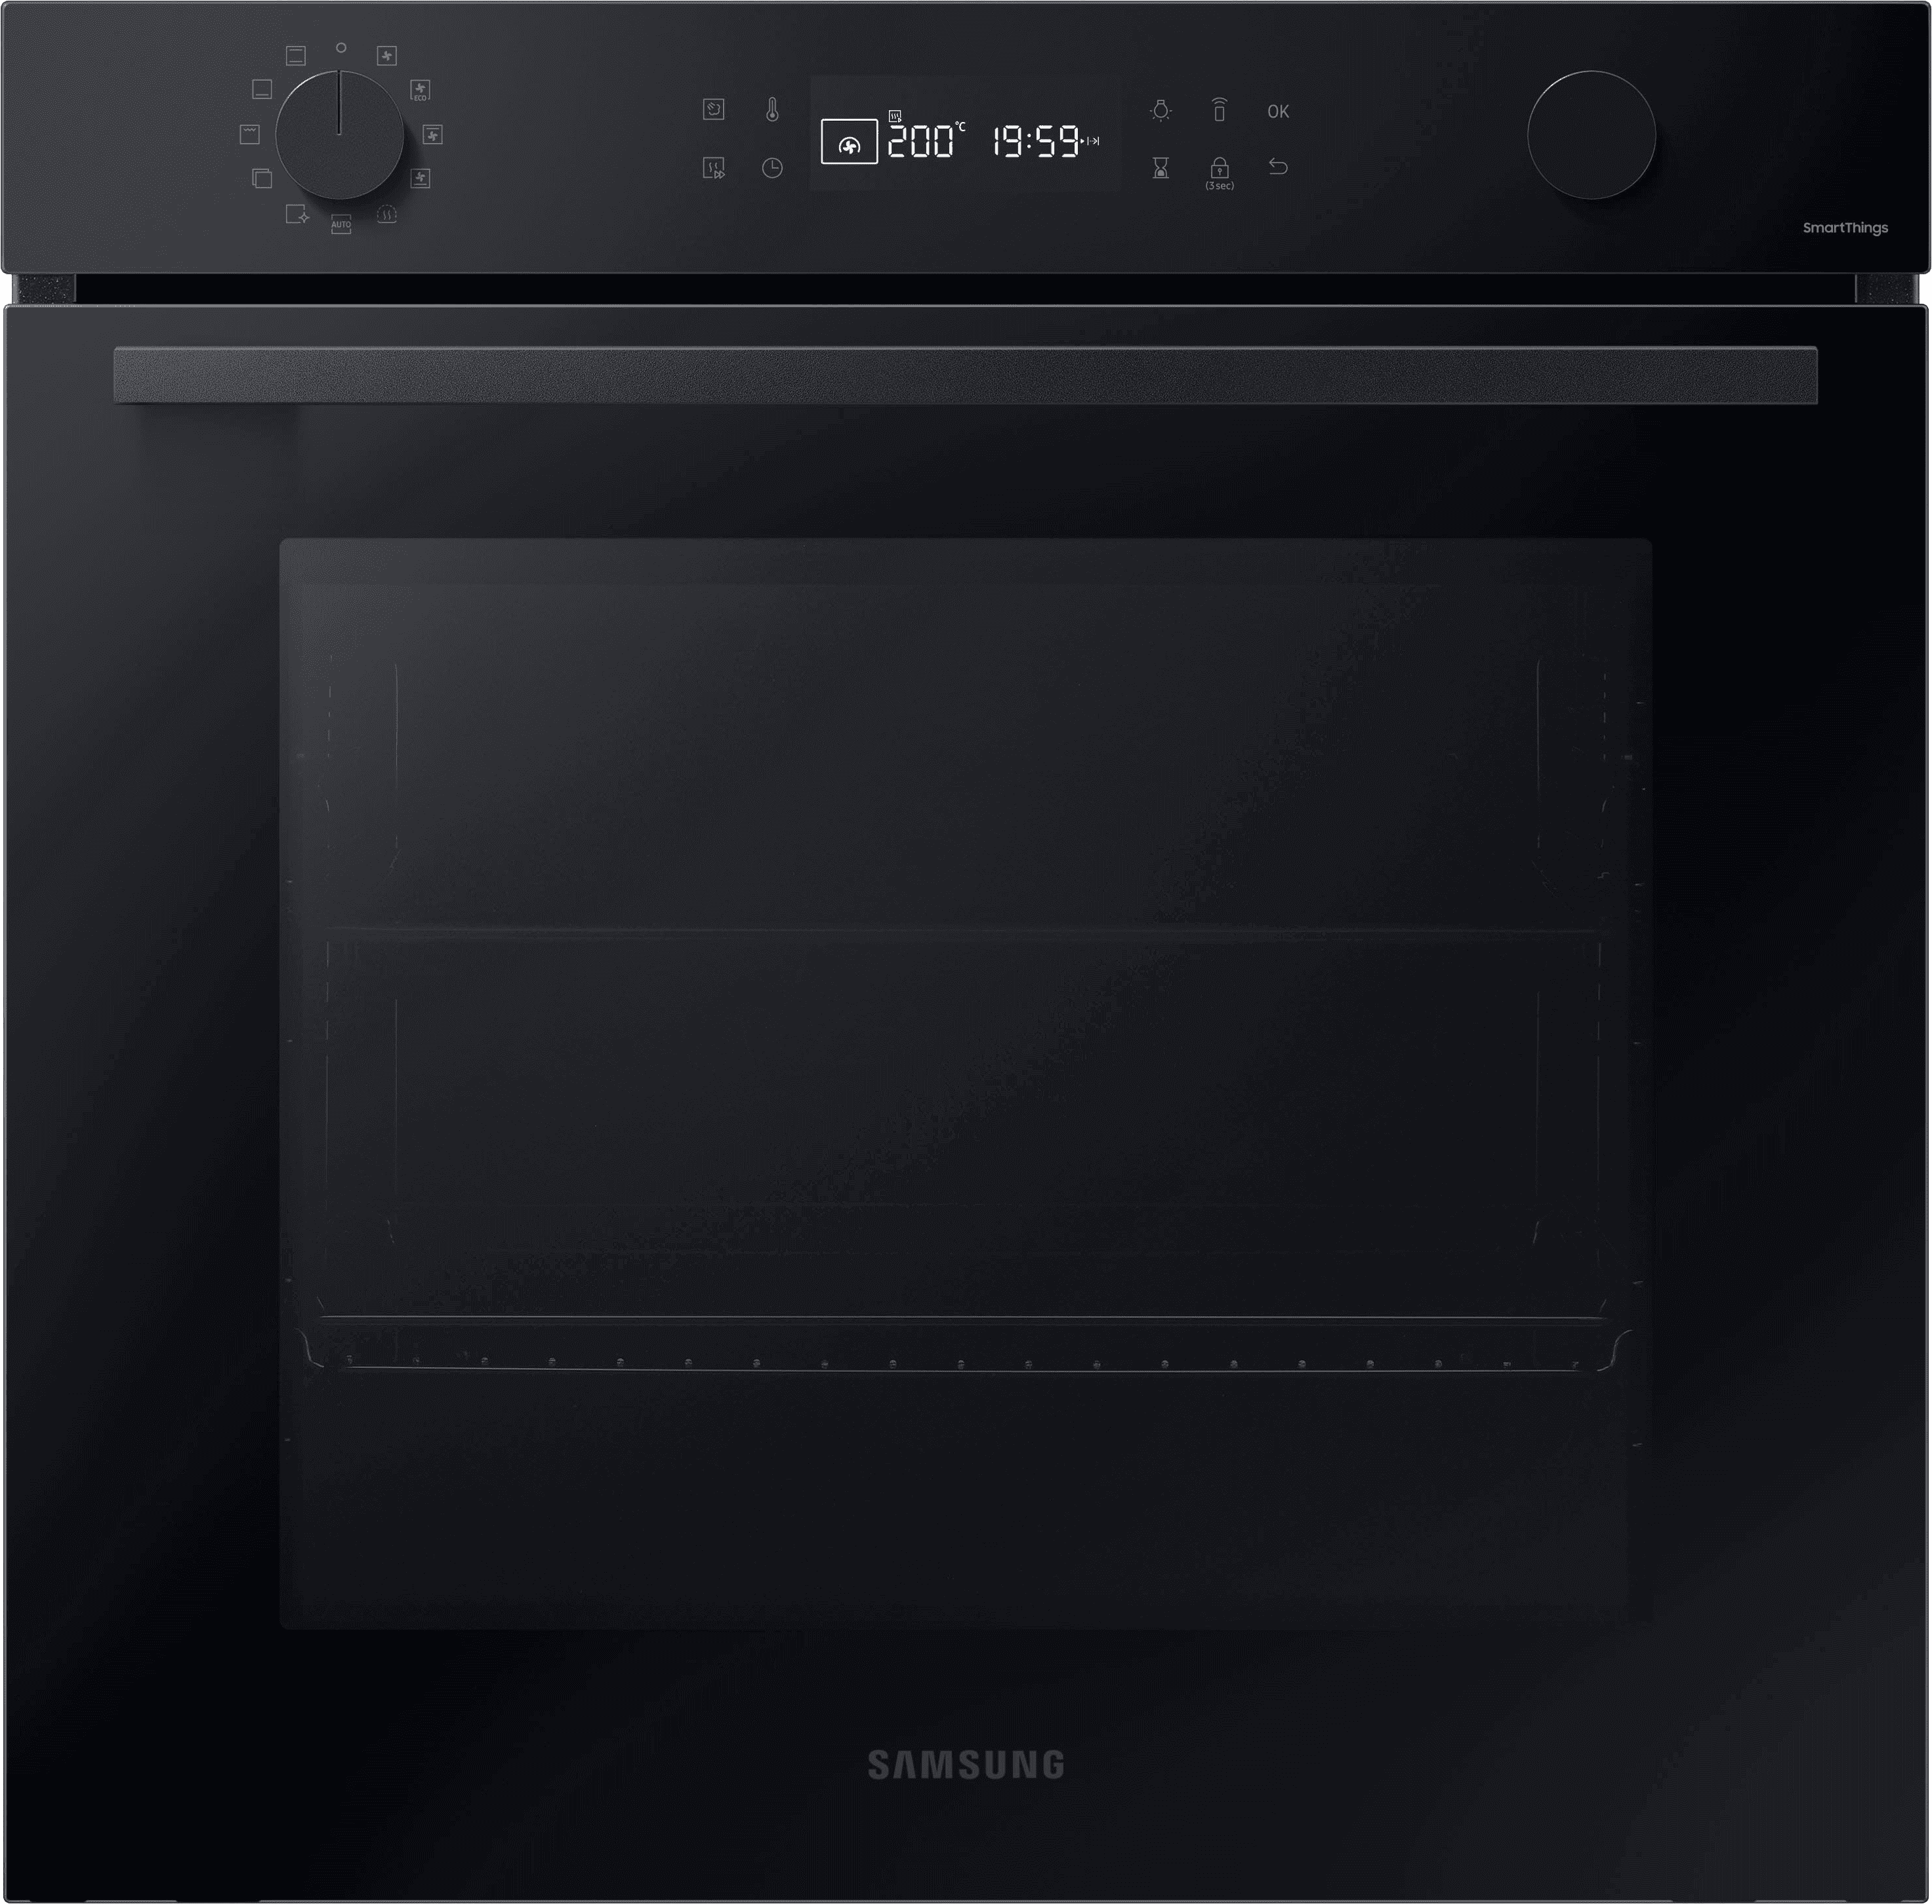 Samsung Series 4 NV7B41403AK/U4 Built In Electric Single Oven - Black - A+ Rated, Black